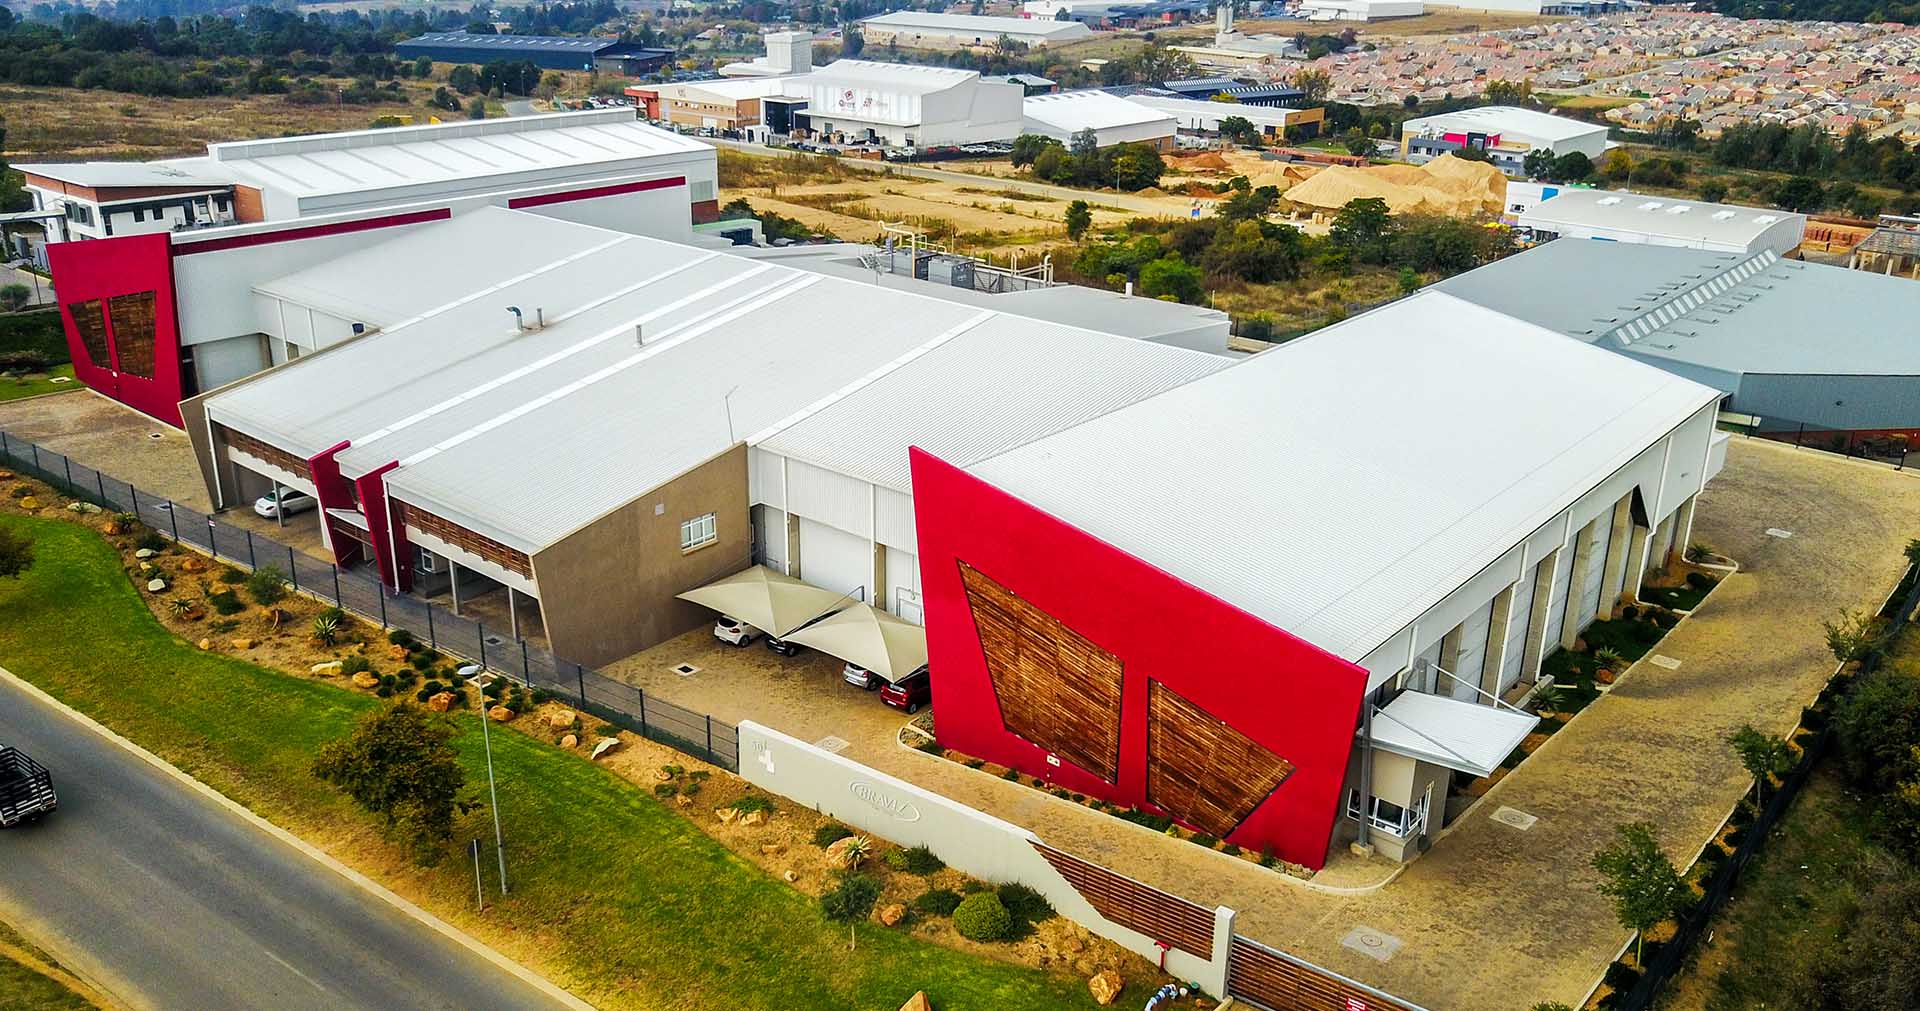 Industrial and Drone Photography, Buildings in South Africa